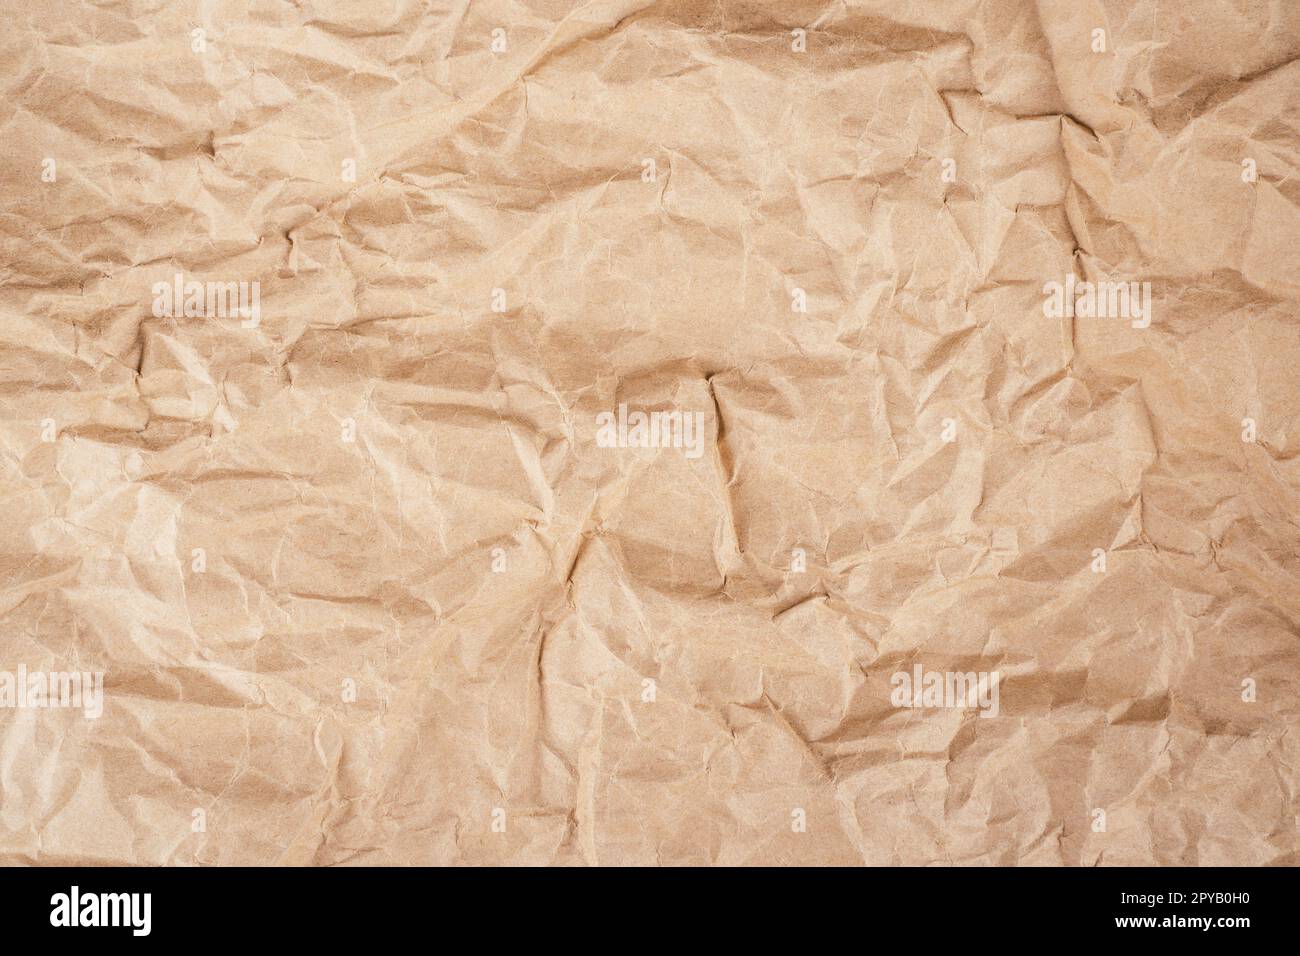 Background image of rough crumpled recycled textured kraft paper. Top view, copy space Stock Photo